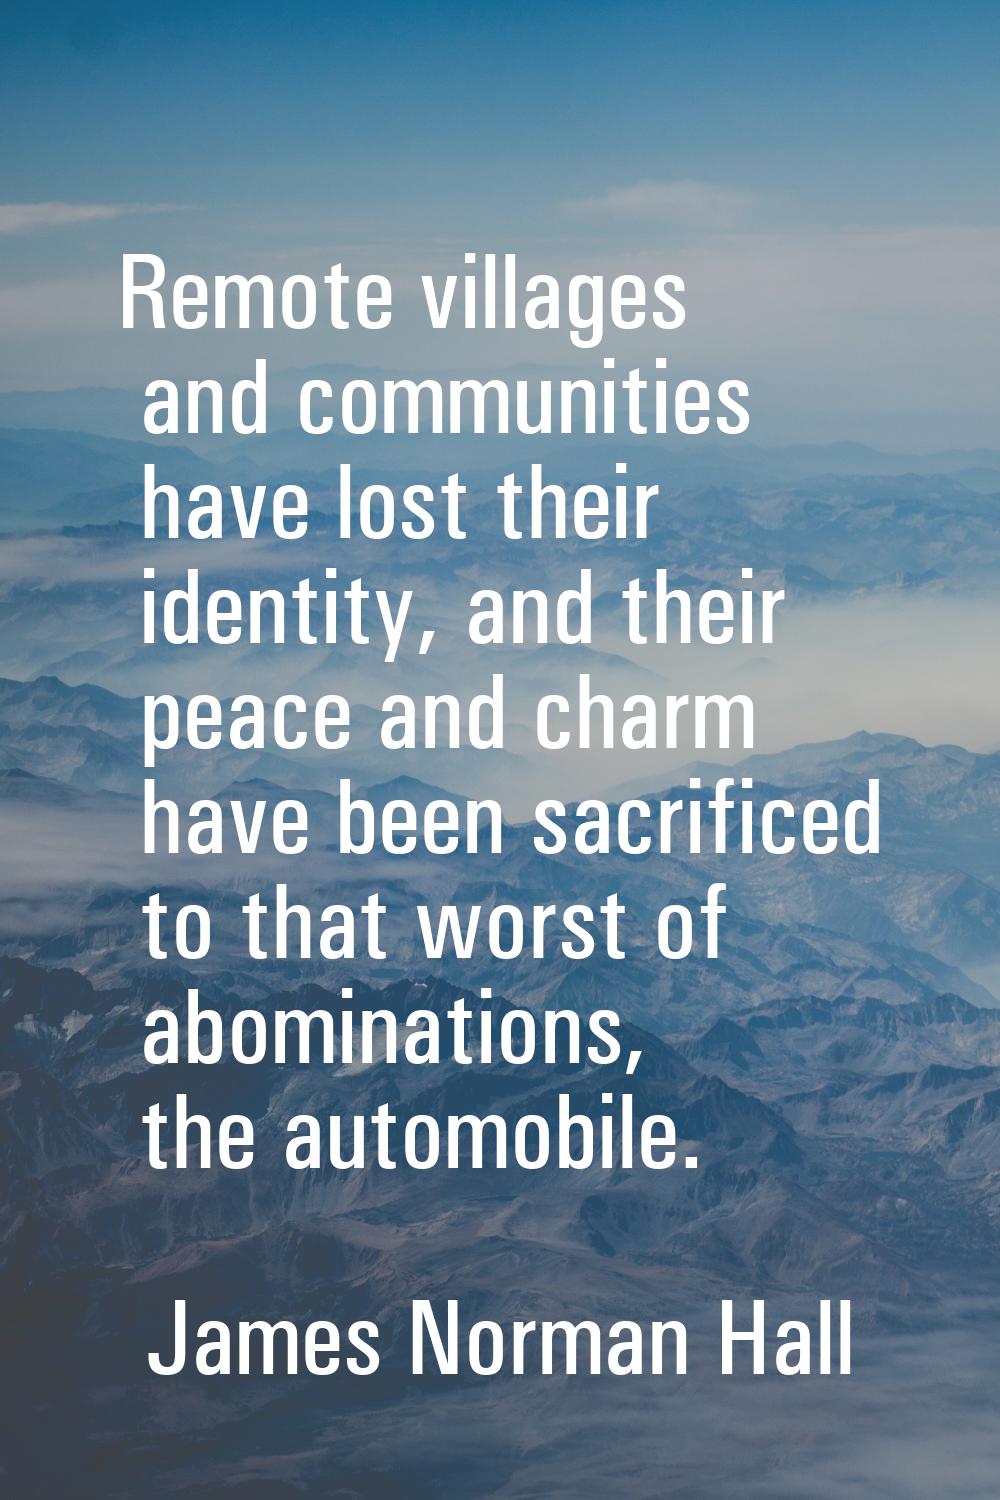 Remote villages and communities have lost their identity, and their peace and charm have been sacri